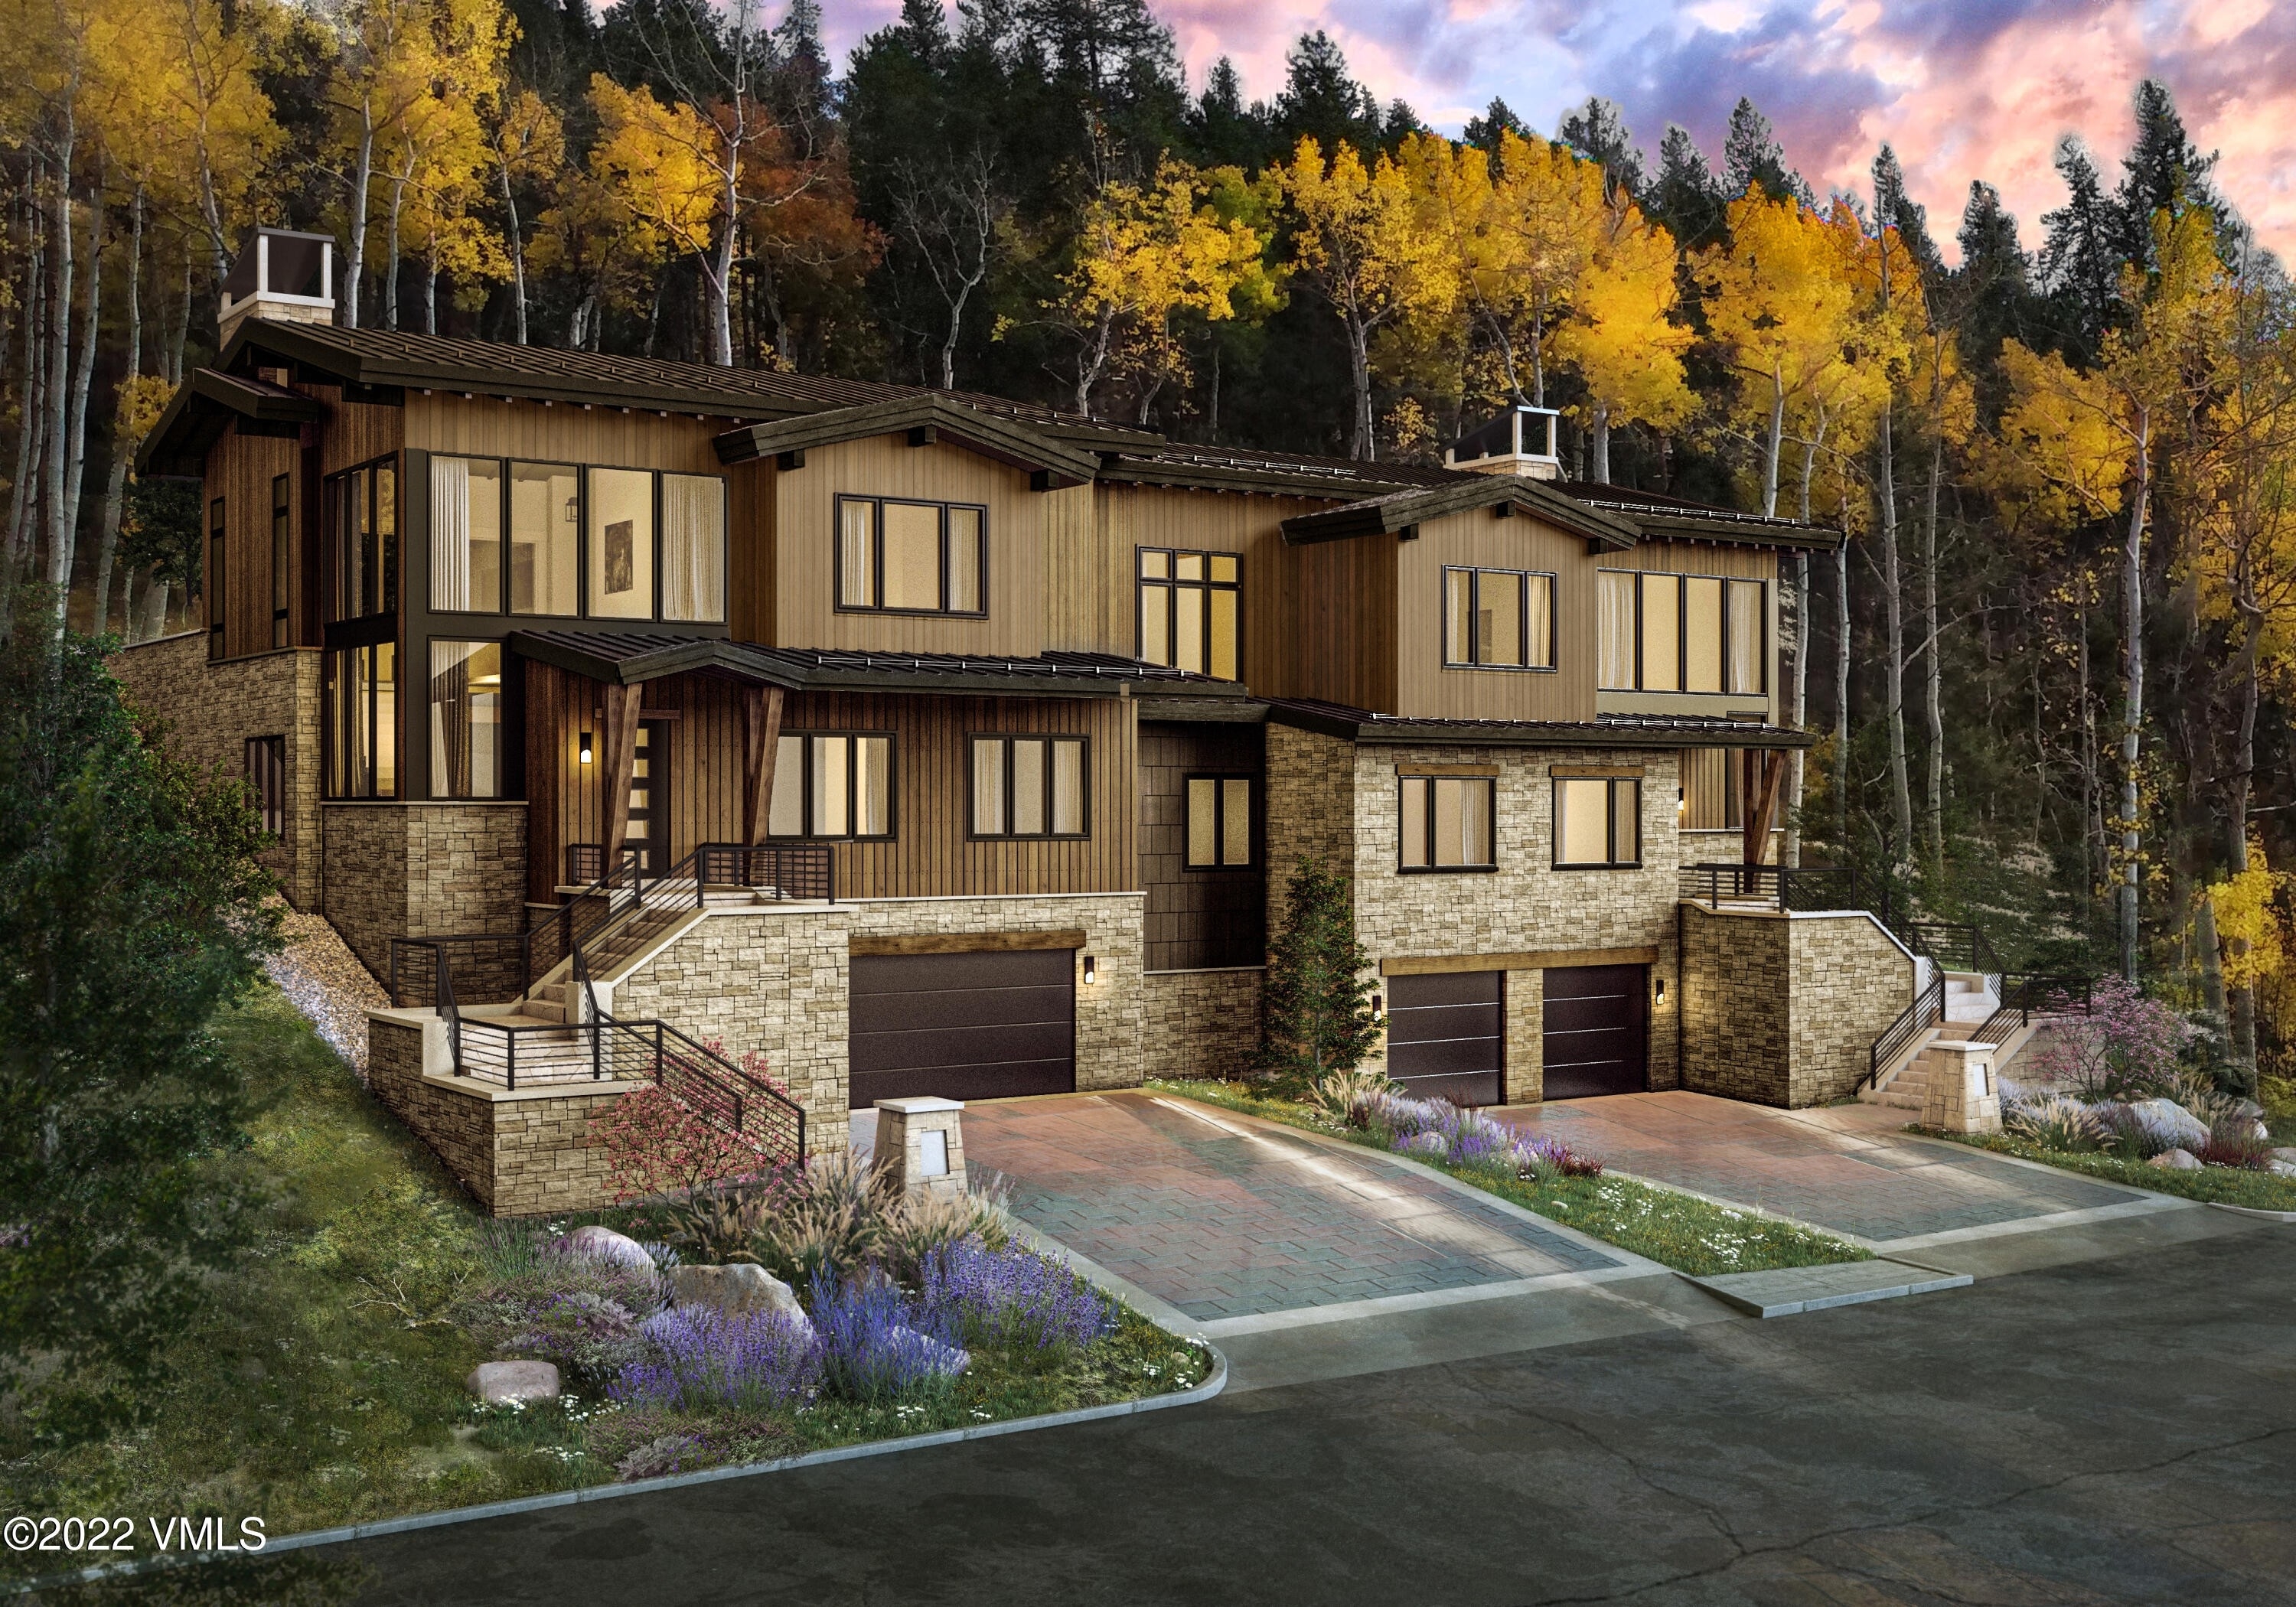 Single Family Home for Sale at Vail, Colorado 81657